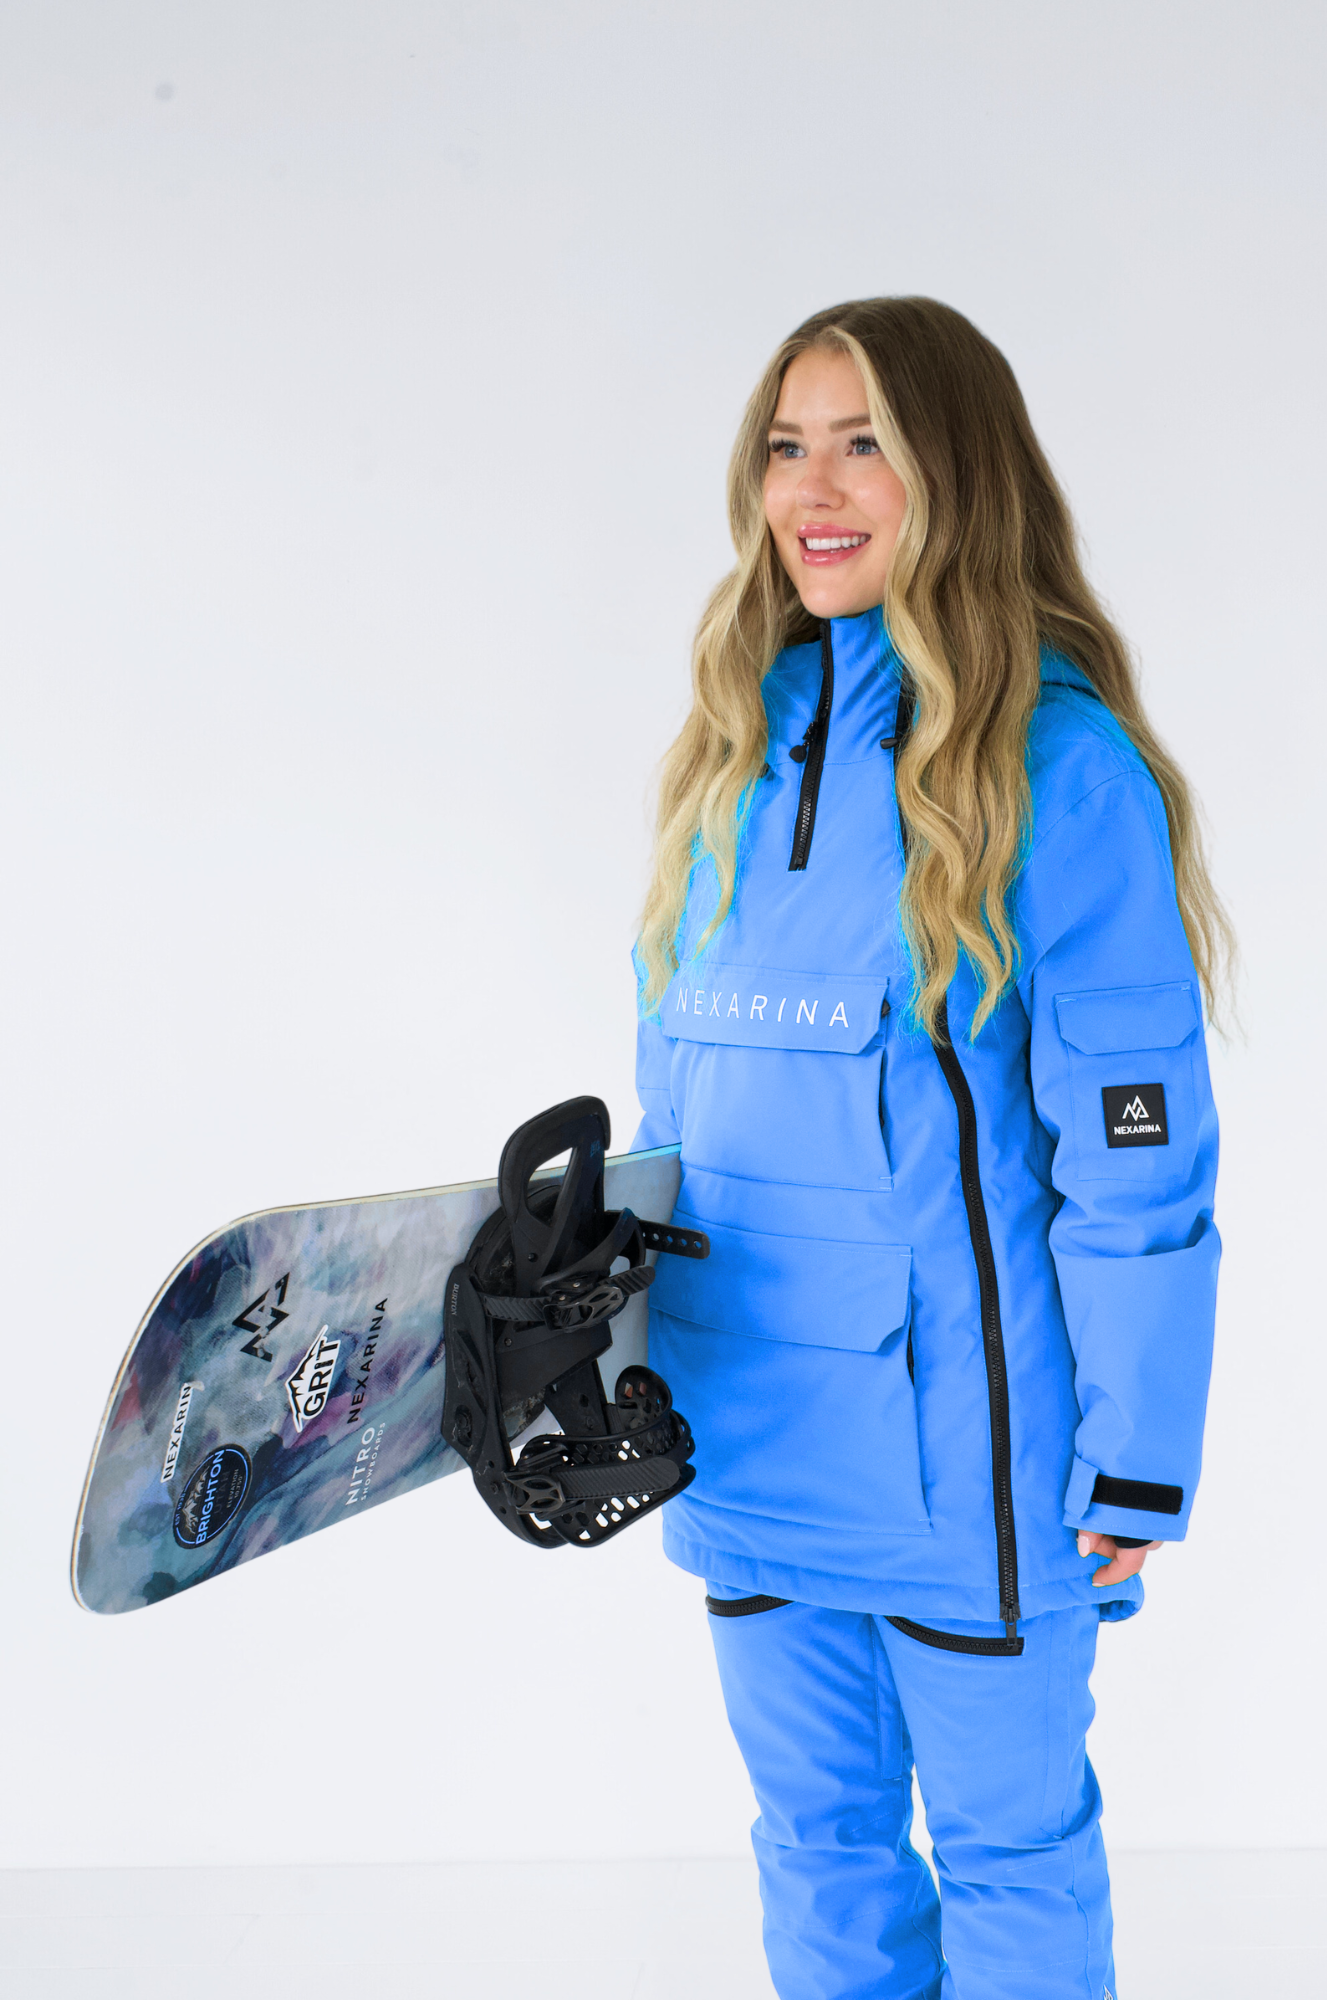 Model in a bright blue Nexarina snowboarding jacket holds a snowboard, smiling warmly, in a studio setting.